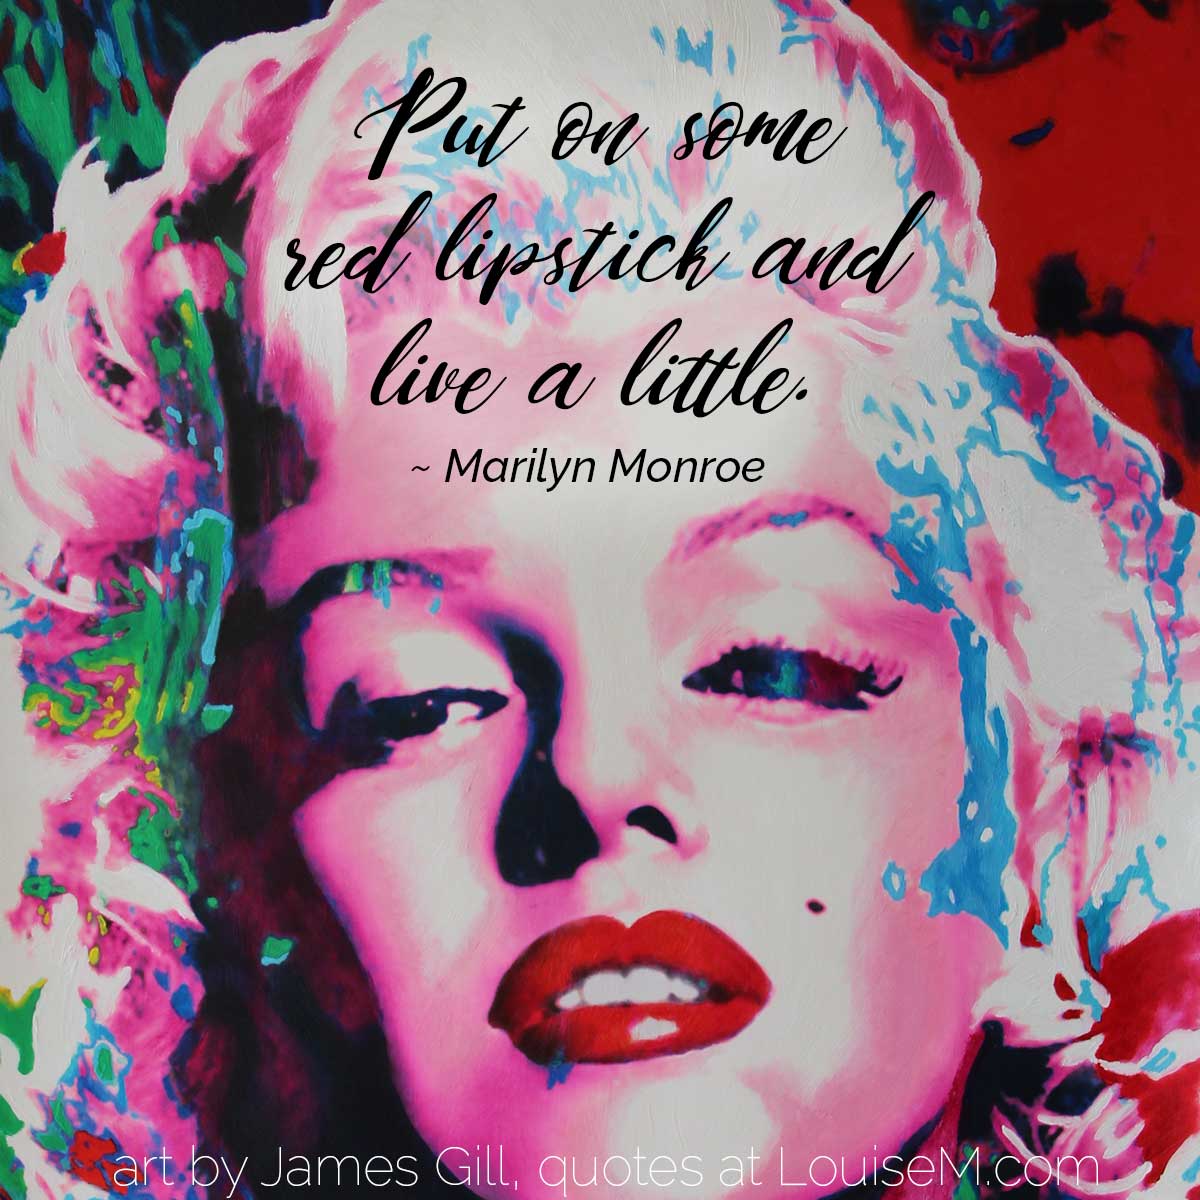 pop art painting of marilyn monroe has her quote, Put on some red lipstick and live a little.